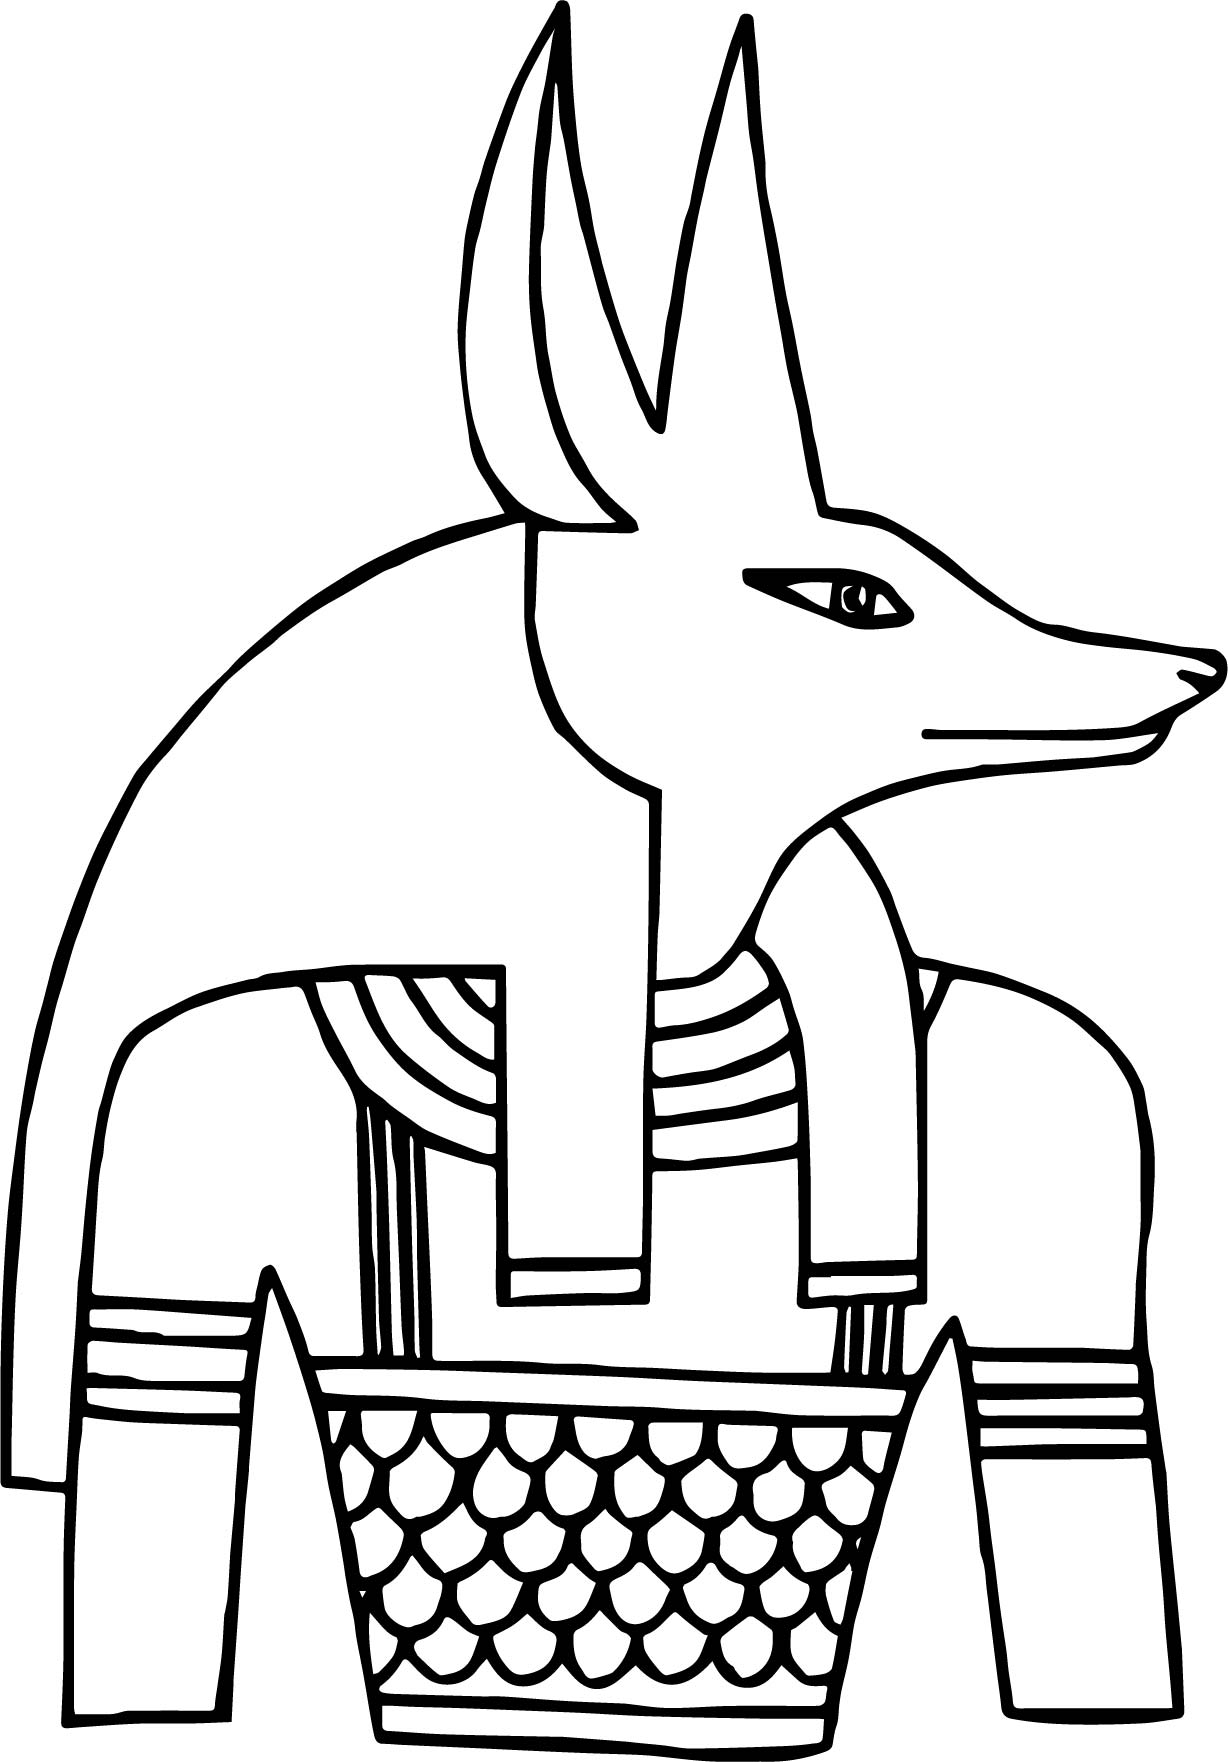 Anubis Just Coloring Page | Wecoloringpage.com